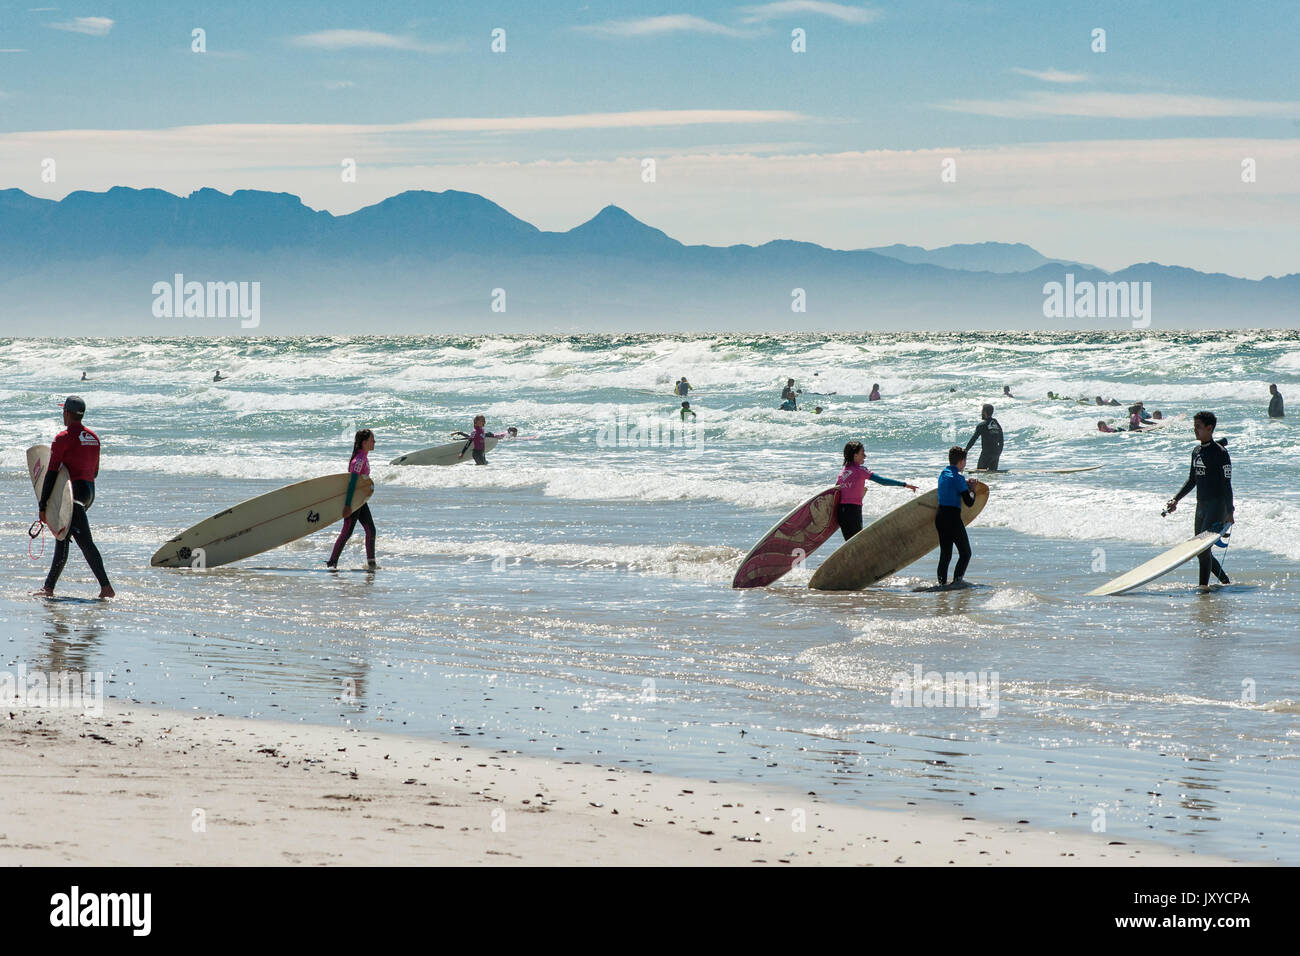 Surfers and bathers at Muizenberg Beach in Cape Town, South Africa. Stock Photo